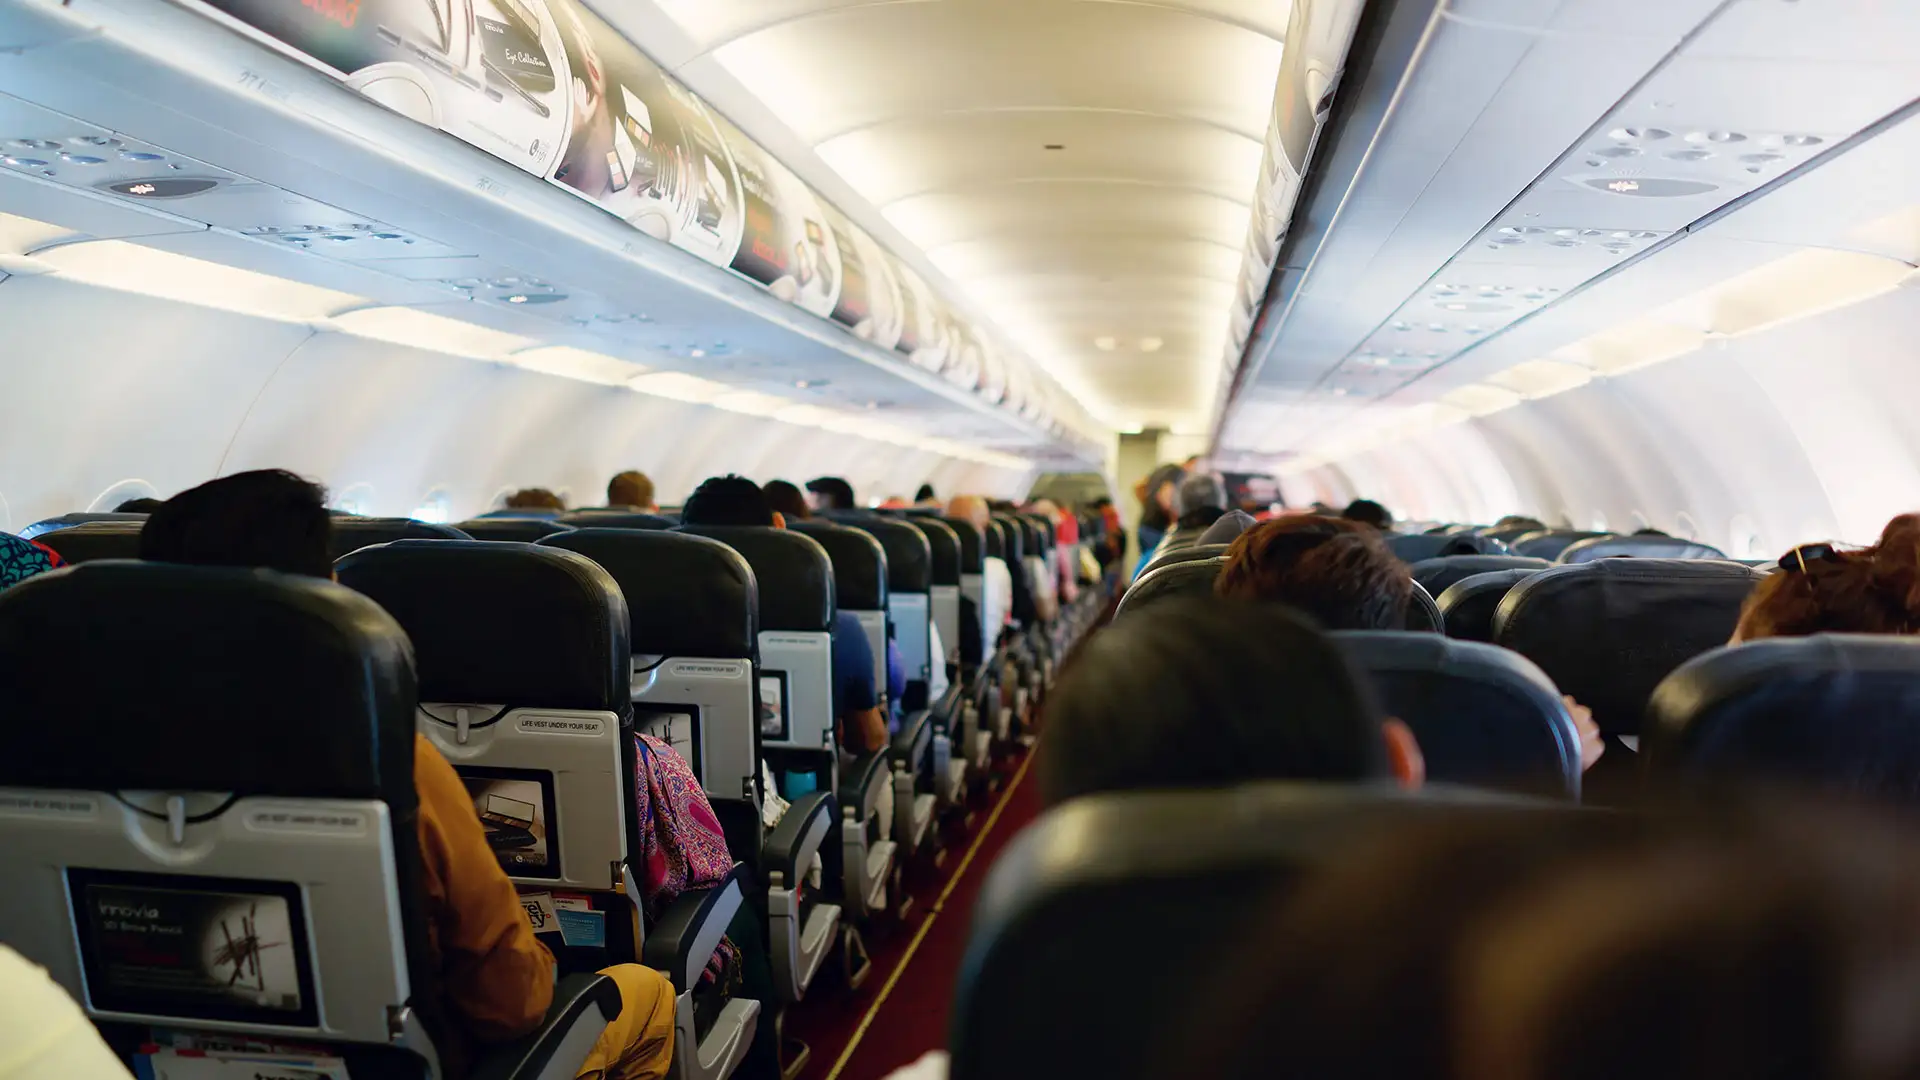 How To Make Your Airline Seat Back Pocket More Useful (And Clean